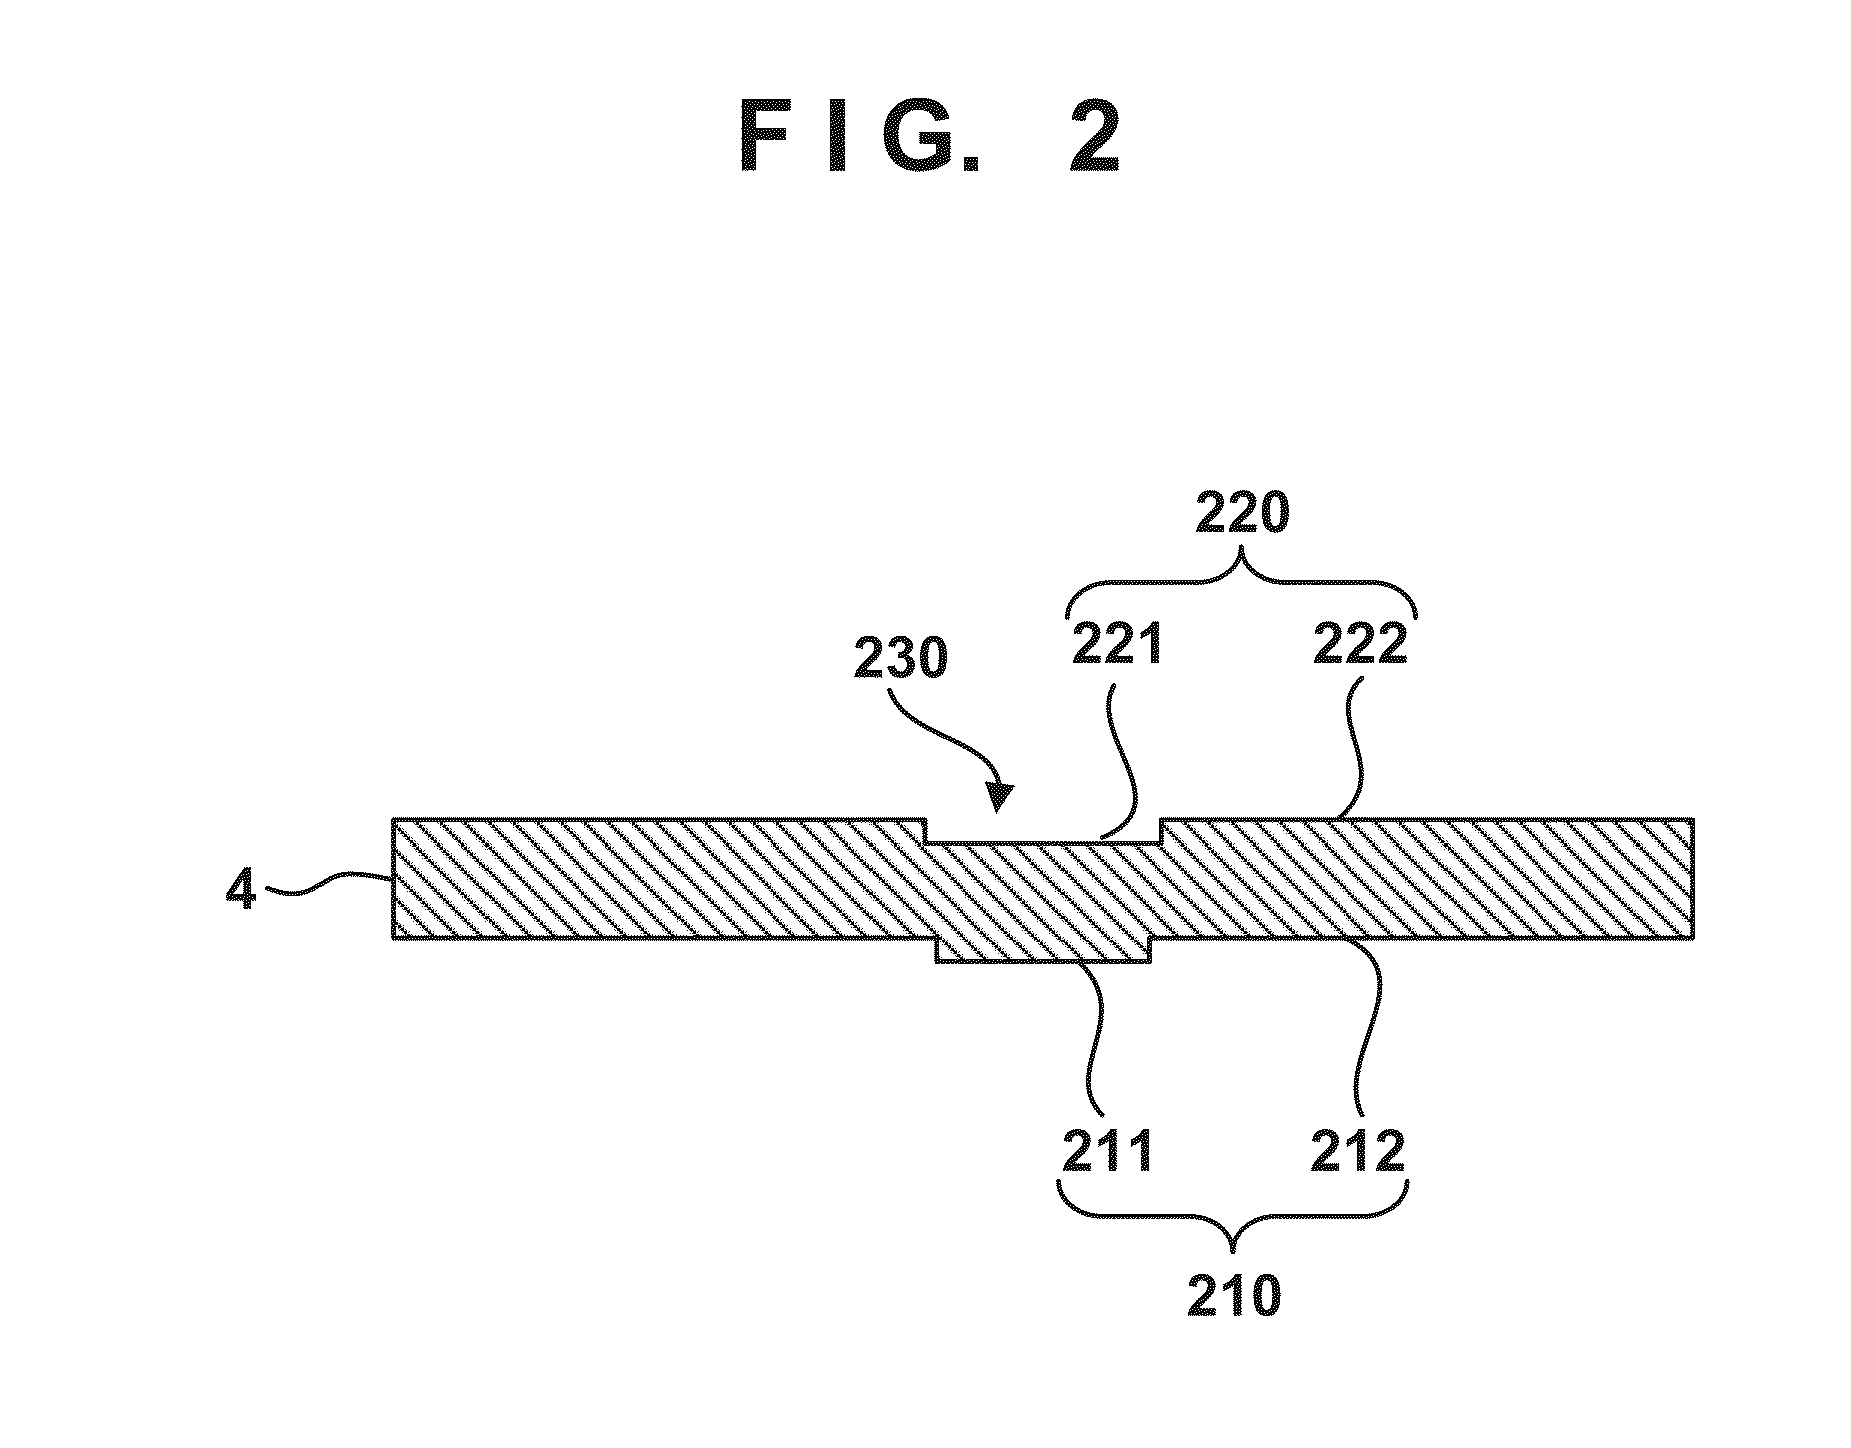 Transfer apparatus and method of manufacturing article